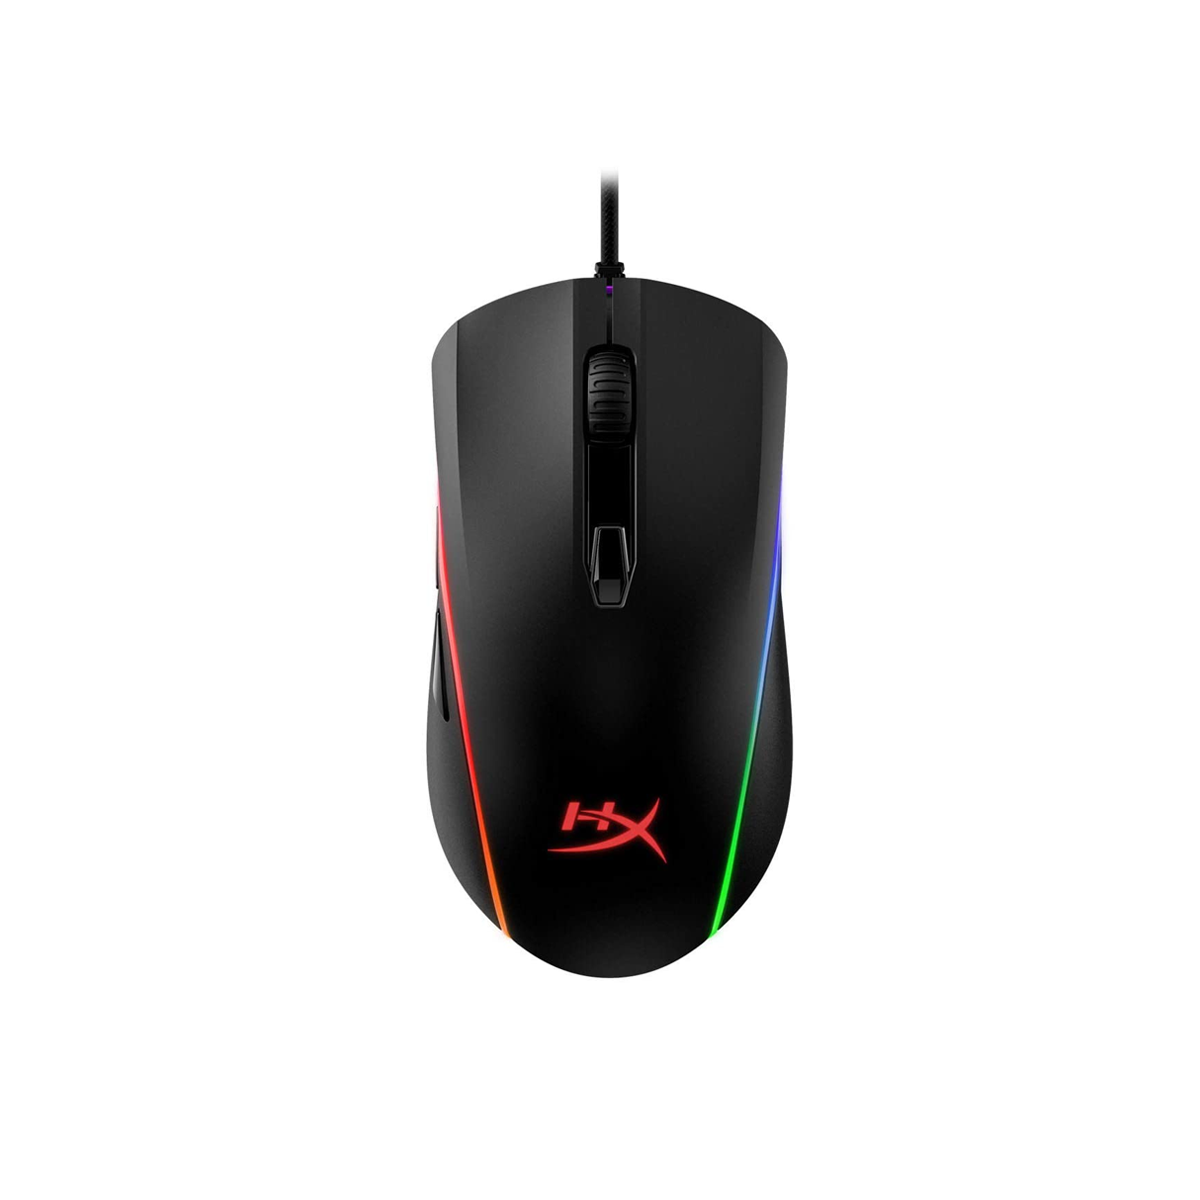 Hyperx Pulesfire Surge Software / HyperX Pulsefire surge RGB gaming mouse - black [GAMO-891 ... - Hyperx ngenuity (beta) hyperx ngenuity is powerful, intuitive software that will allow you to personalize your compatible hyperx products.